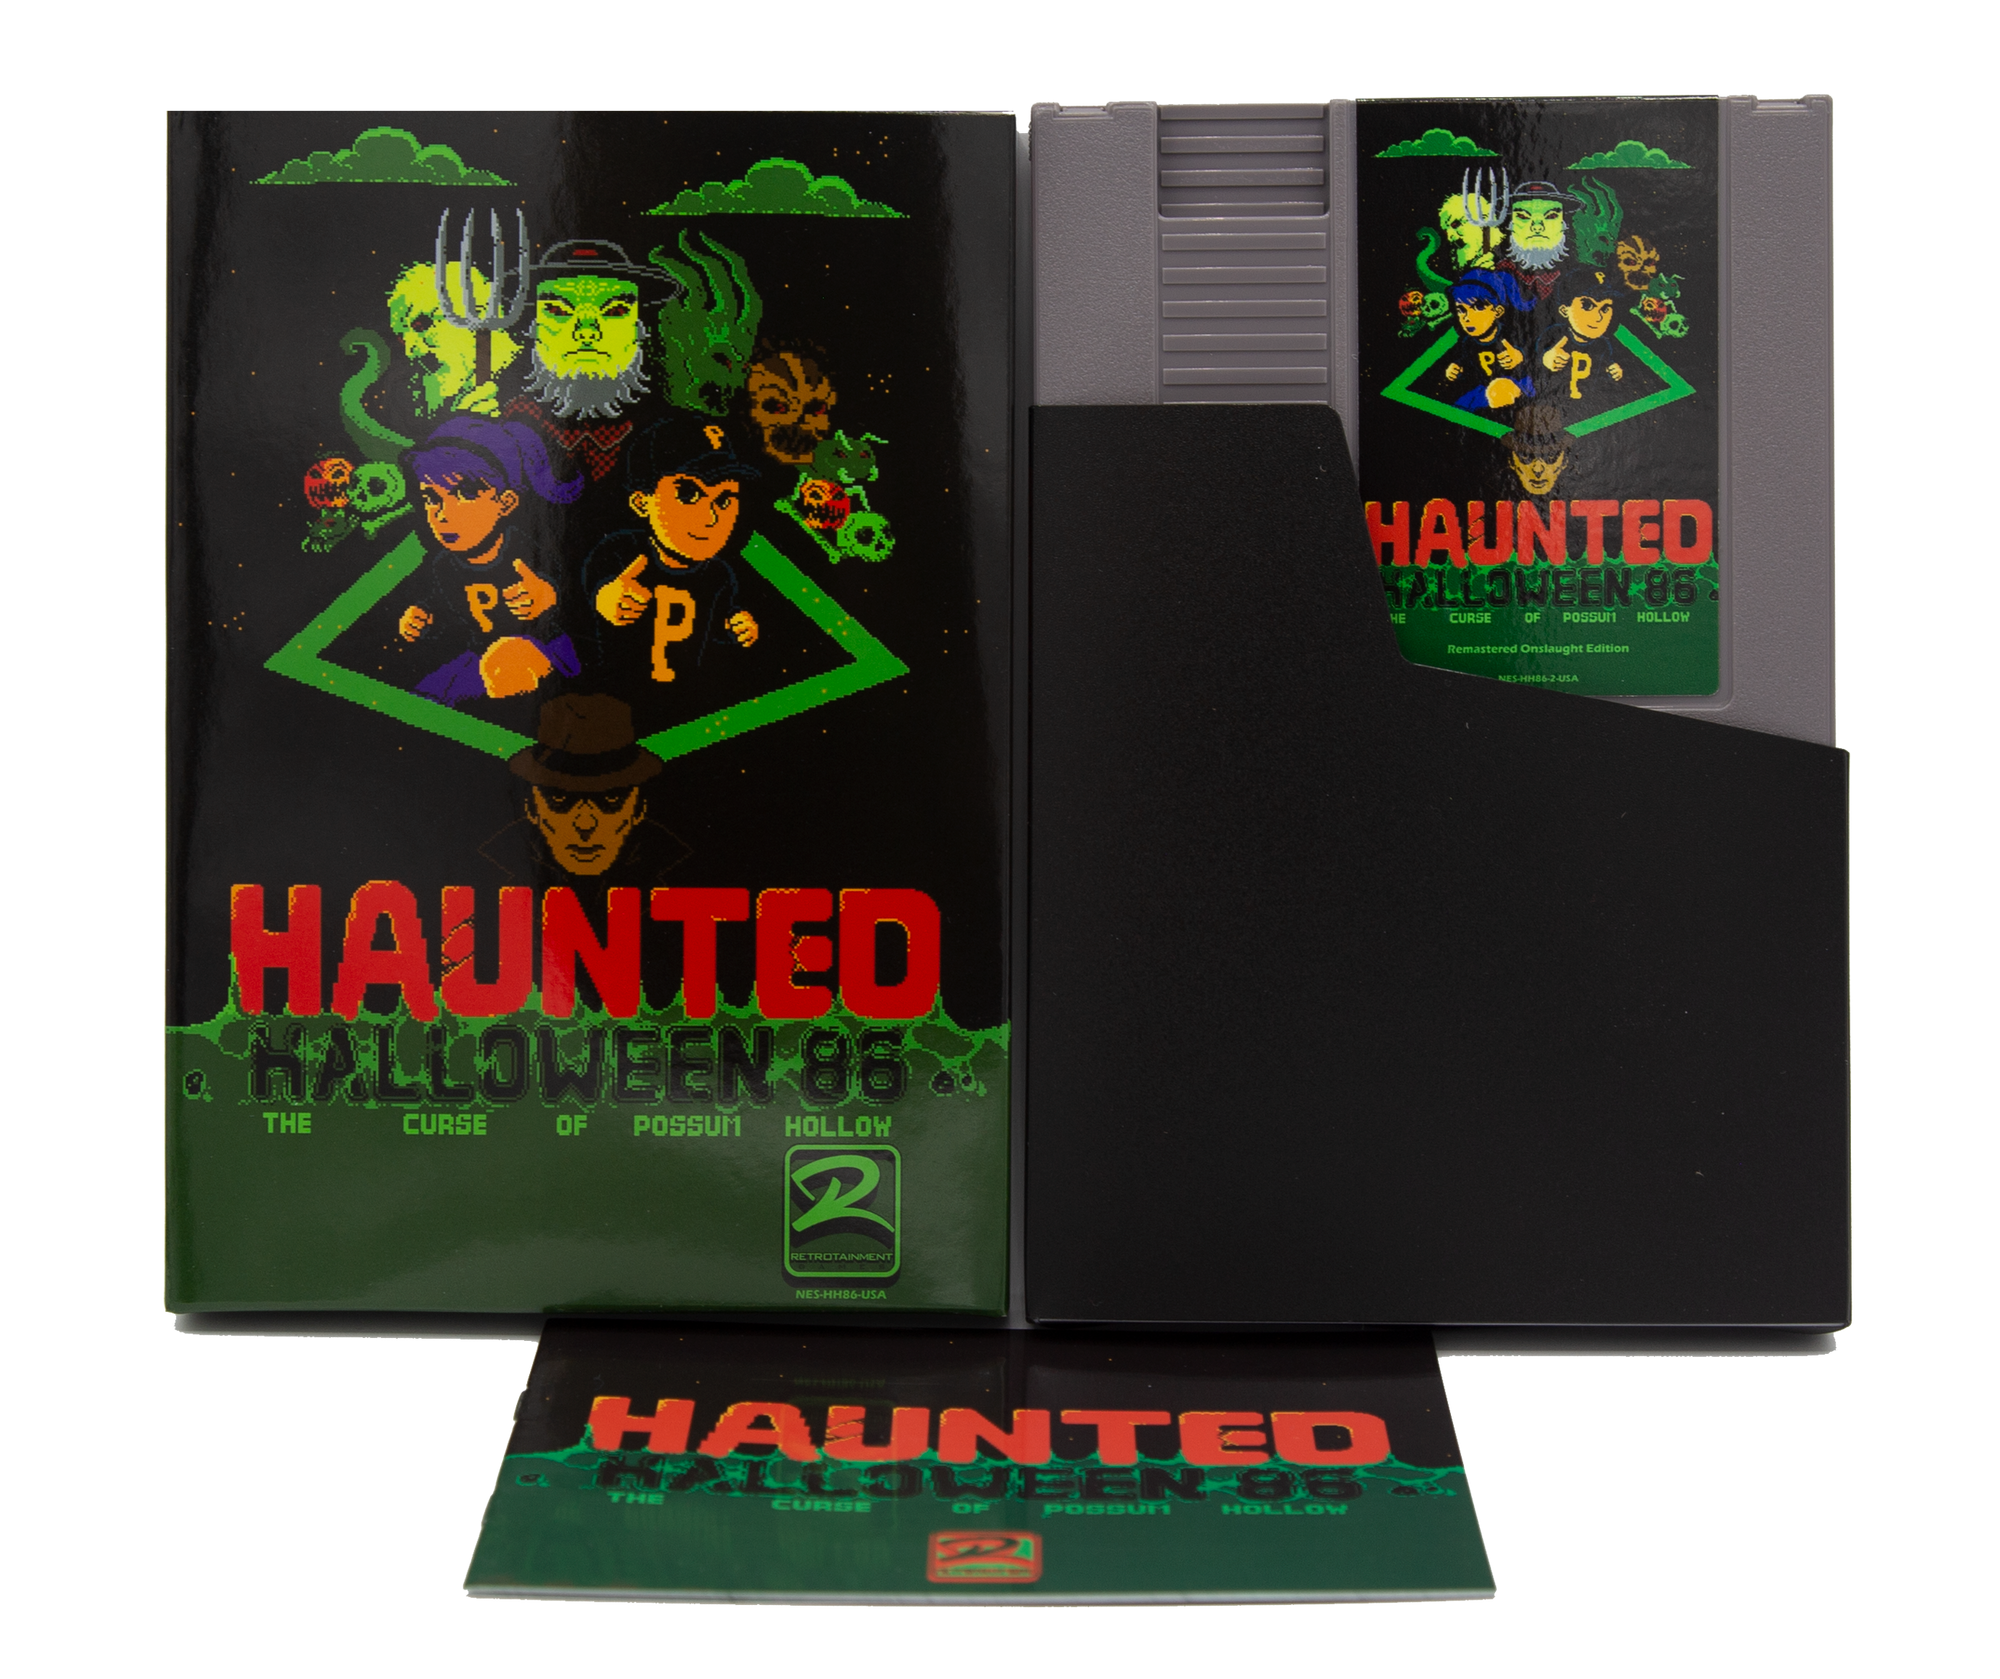 Haunted: Halloween '86 (The Curse of Possum Hollow) NES Game (Gray Cartridge Complete in Box)